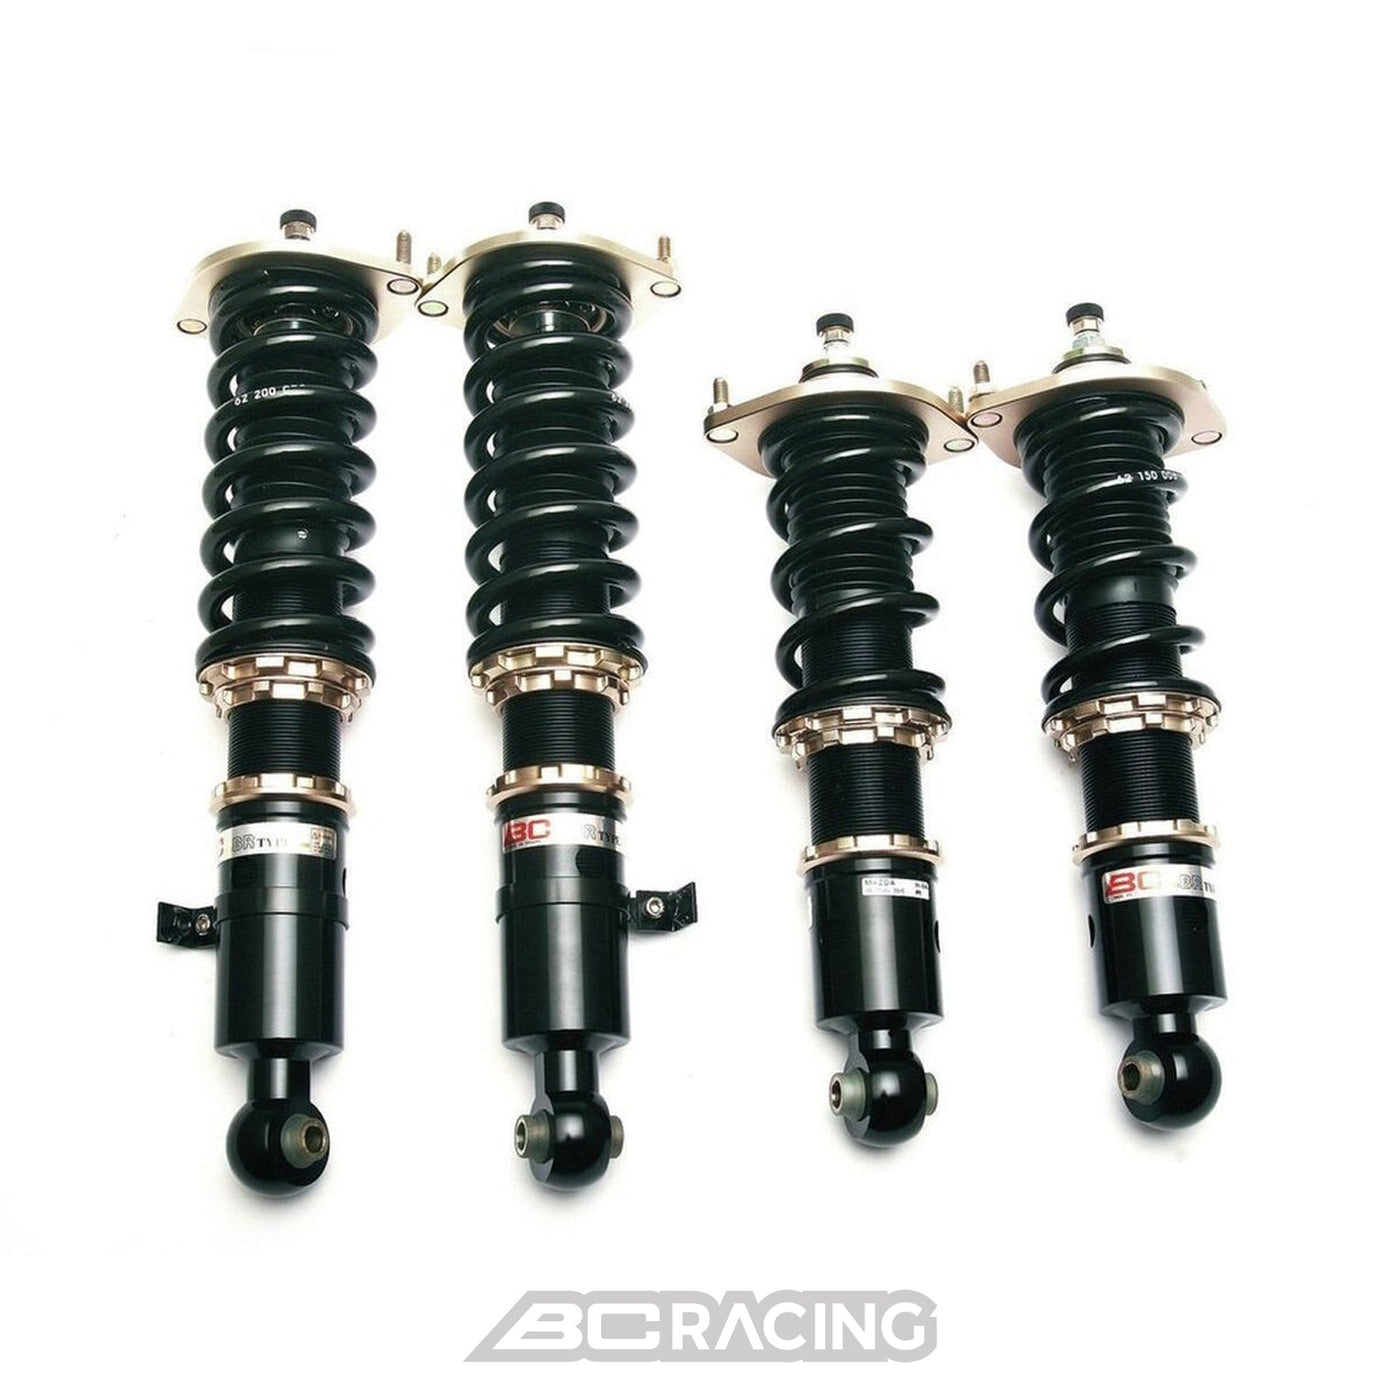 BC Racing Coilovers 2006-2009 VW Golf V 1.6 (49.5mm Front Strut)